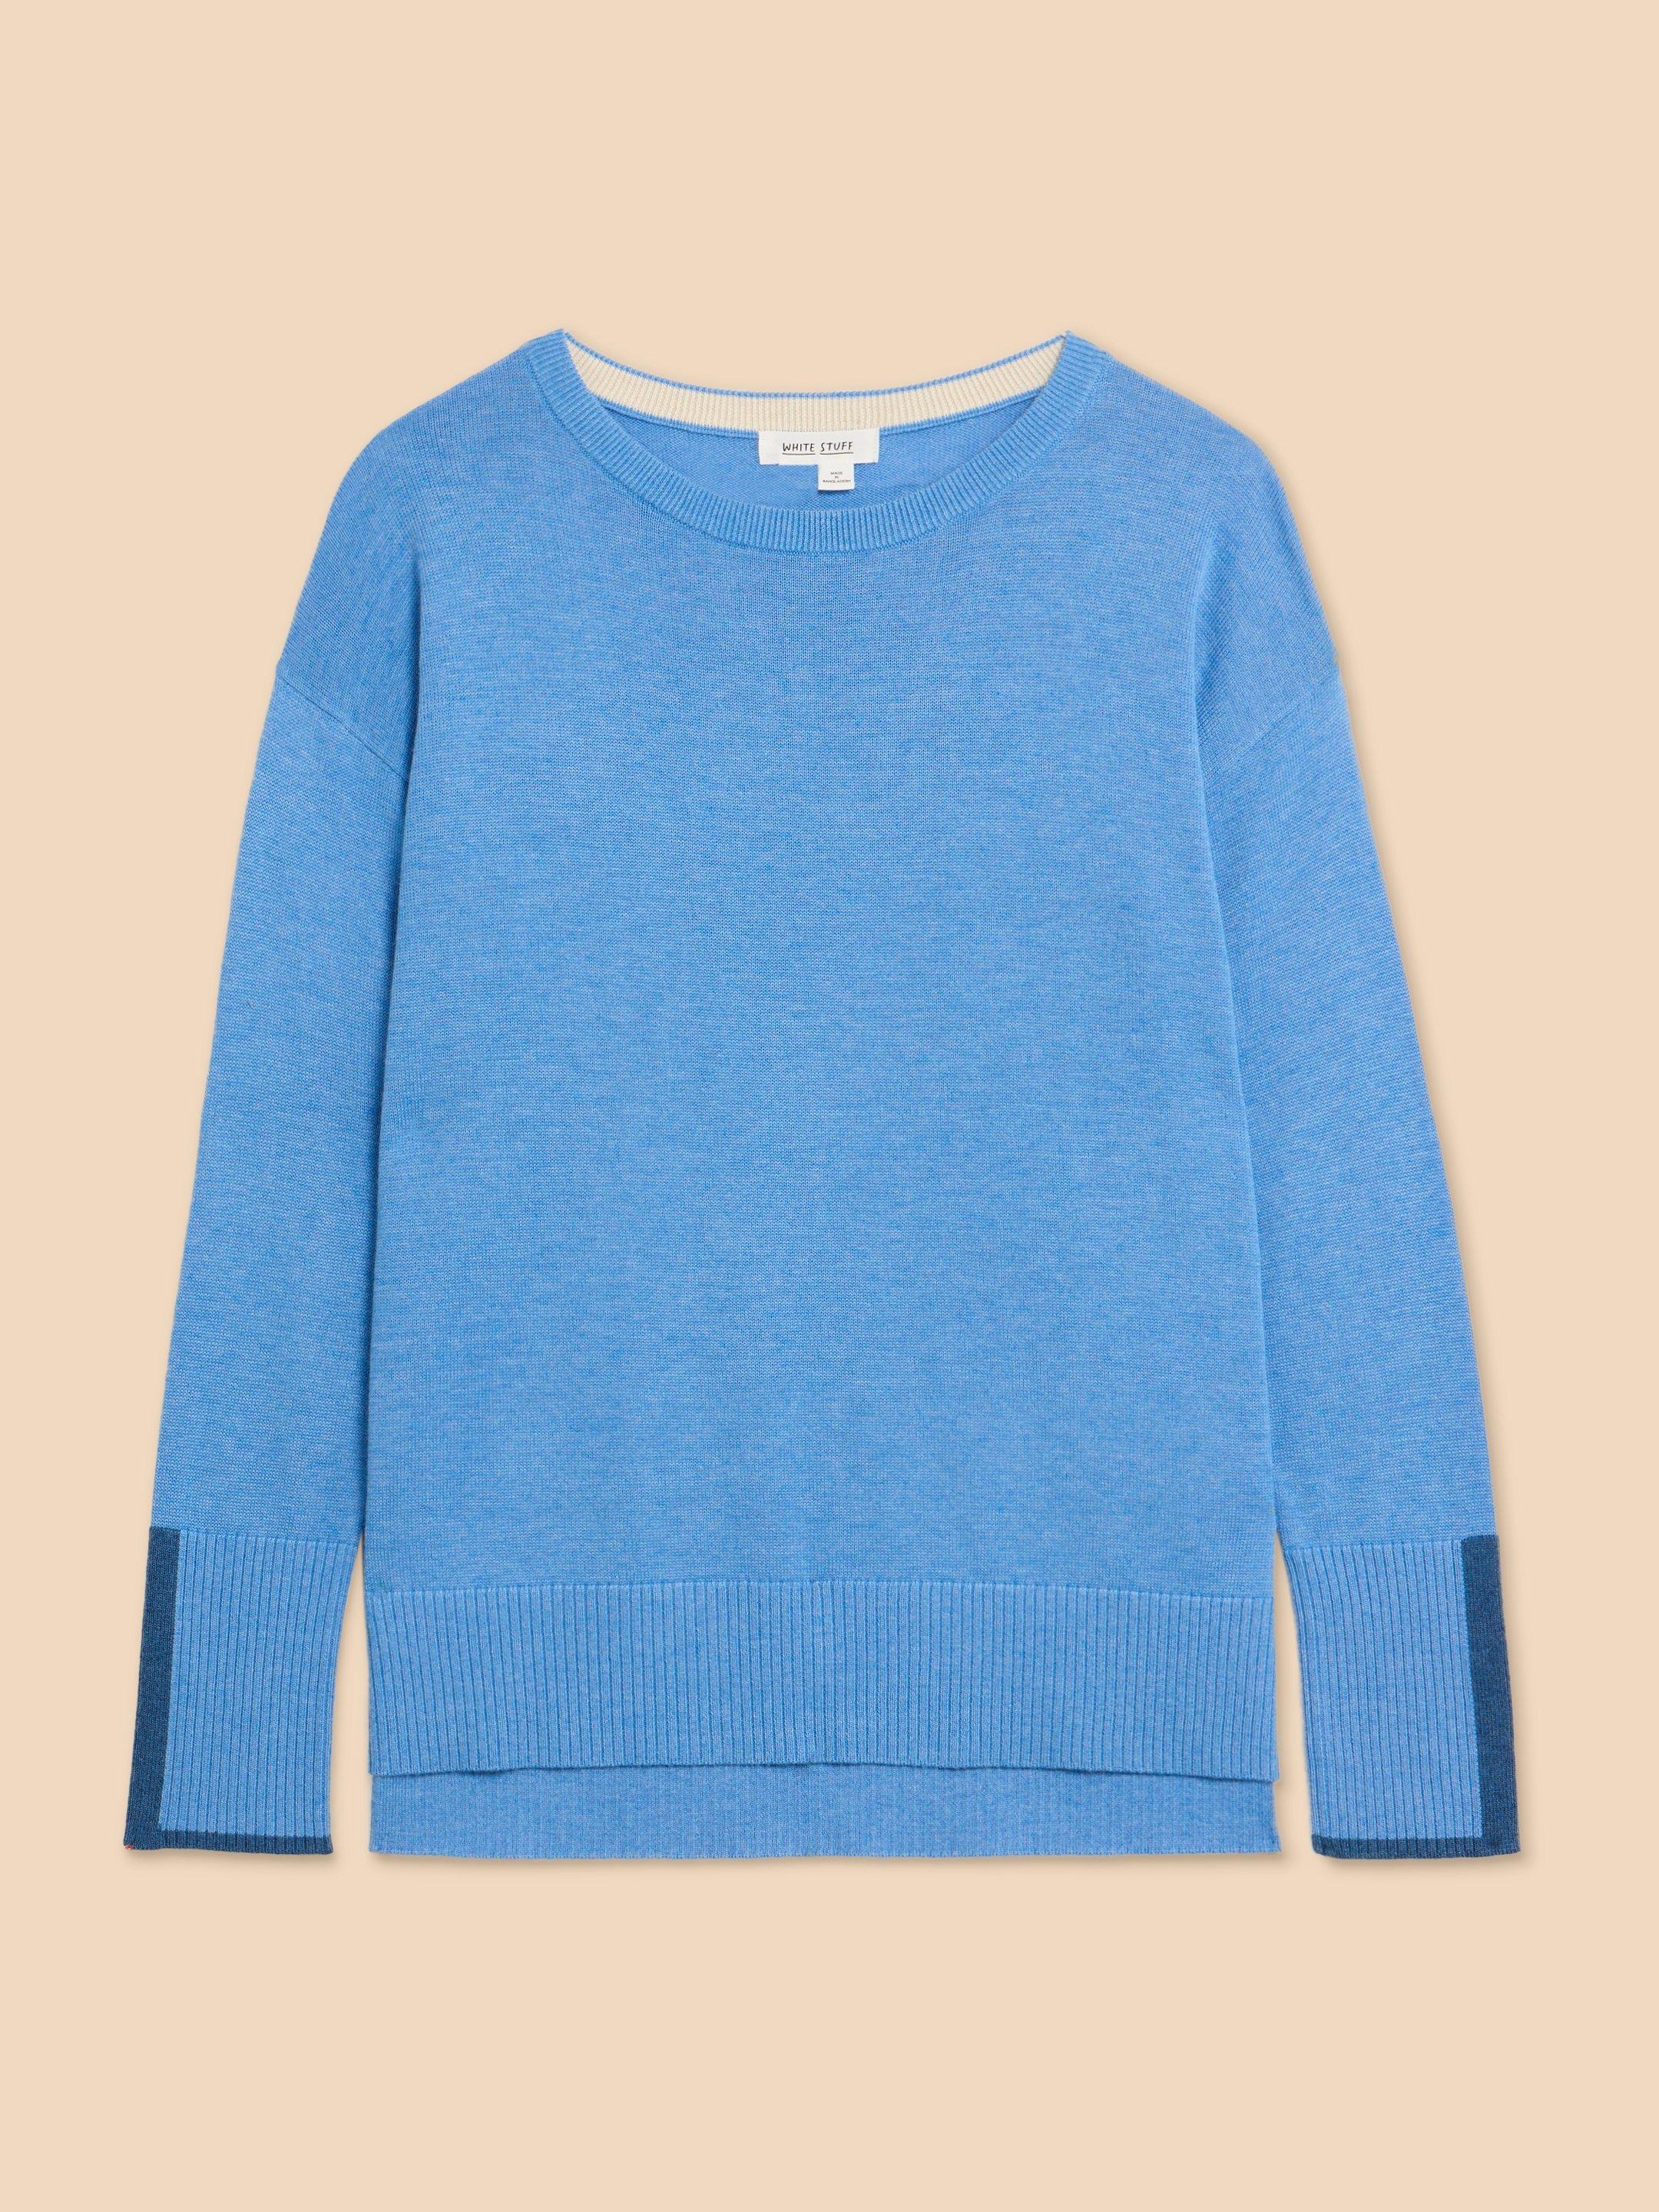 OLIVE CREW JUMPER in CHAMB BLUE - FLAT FRONT